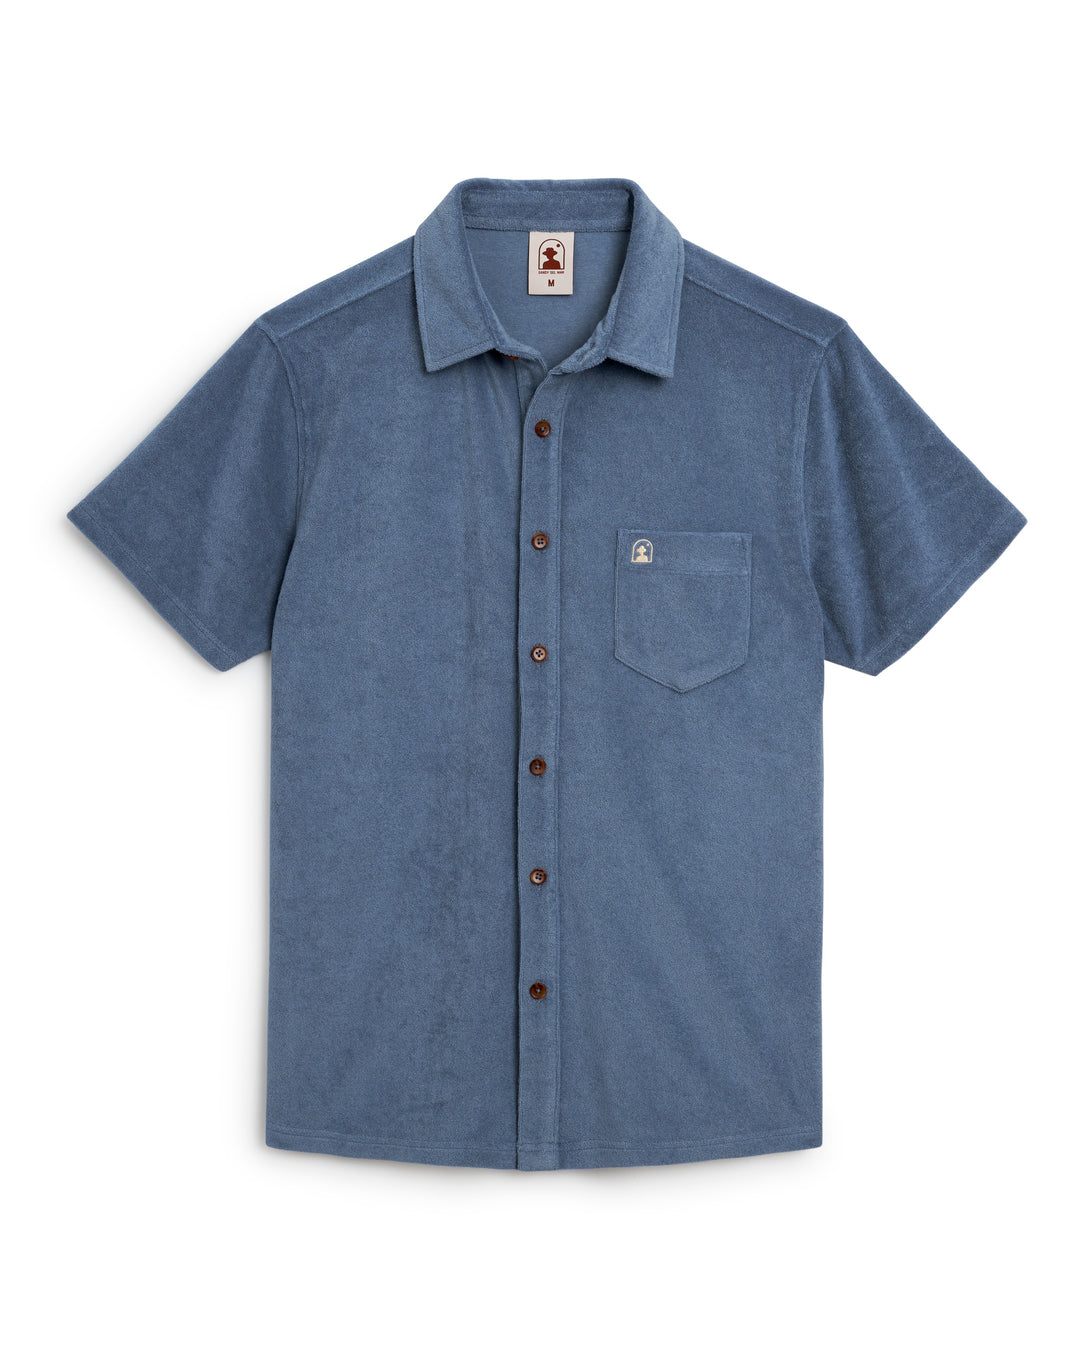 An elegant Tropez Shirt - Annapolis by Dandy Del Mar in a tailored fit with a button-up design, featuring a pocket.